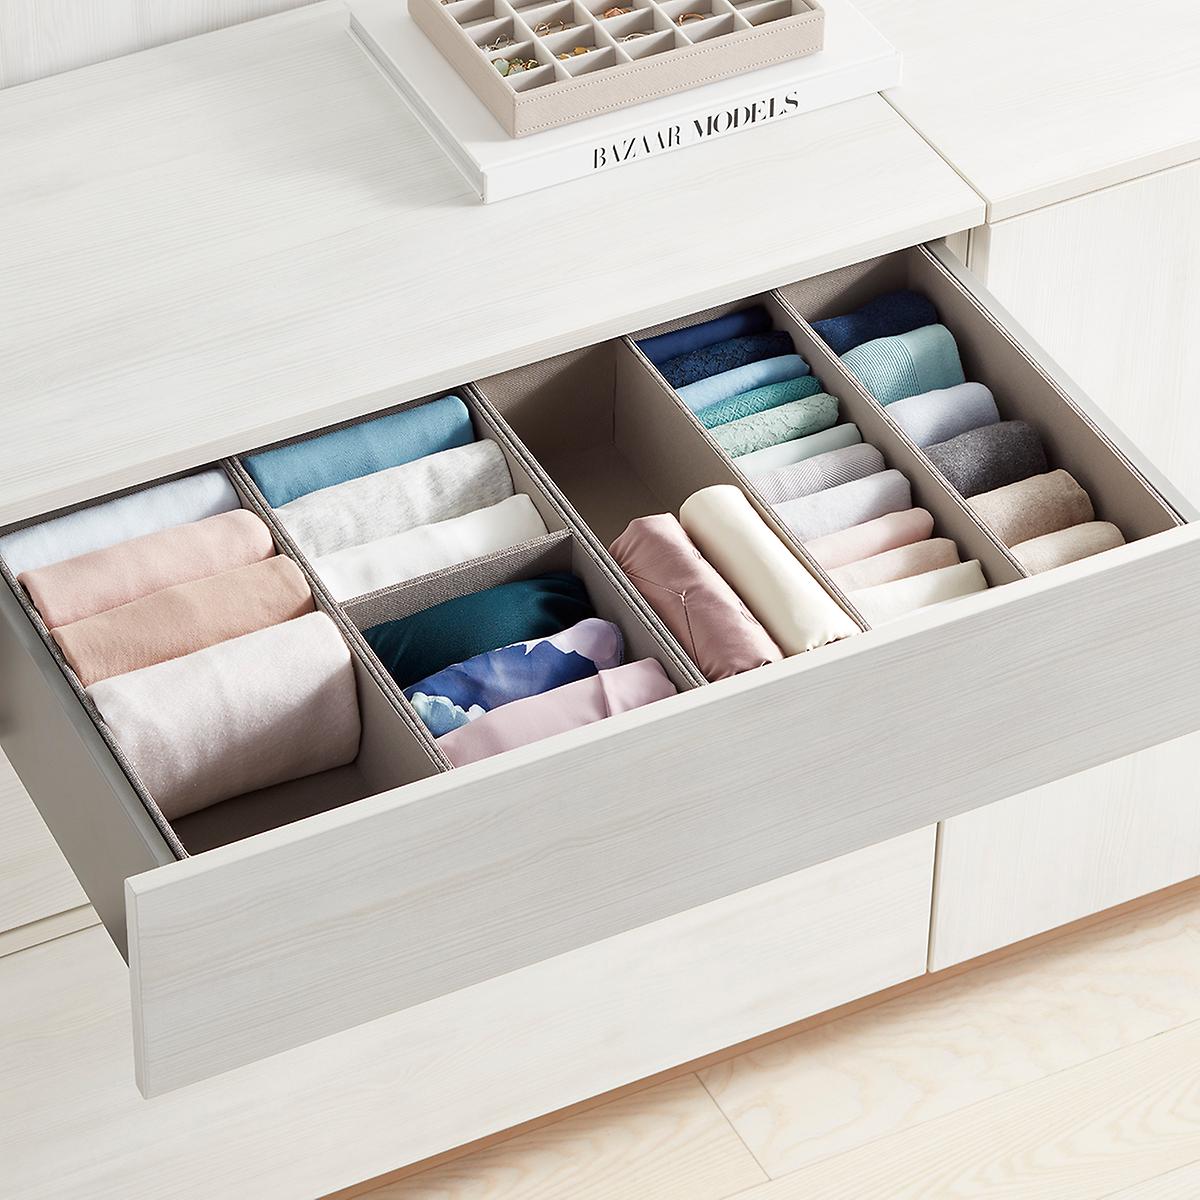 Grey Cambridge Drawer Organizers The Container Store